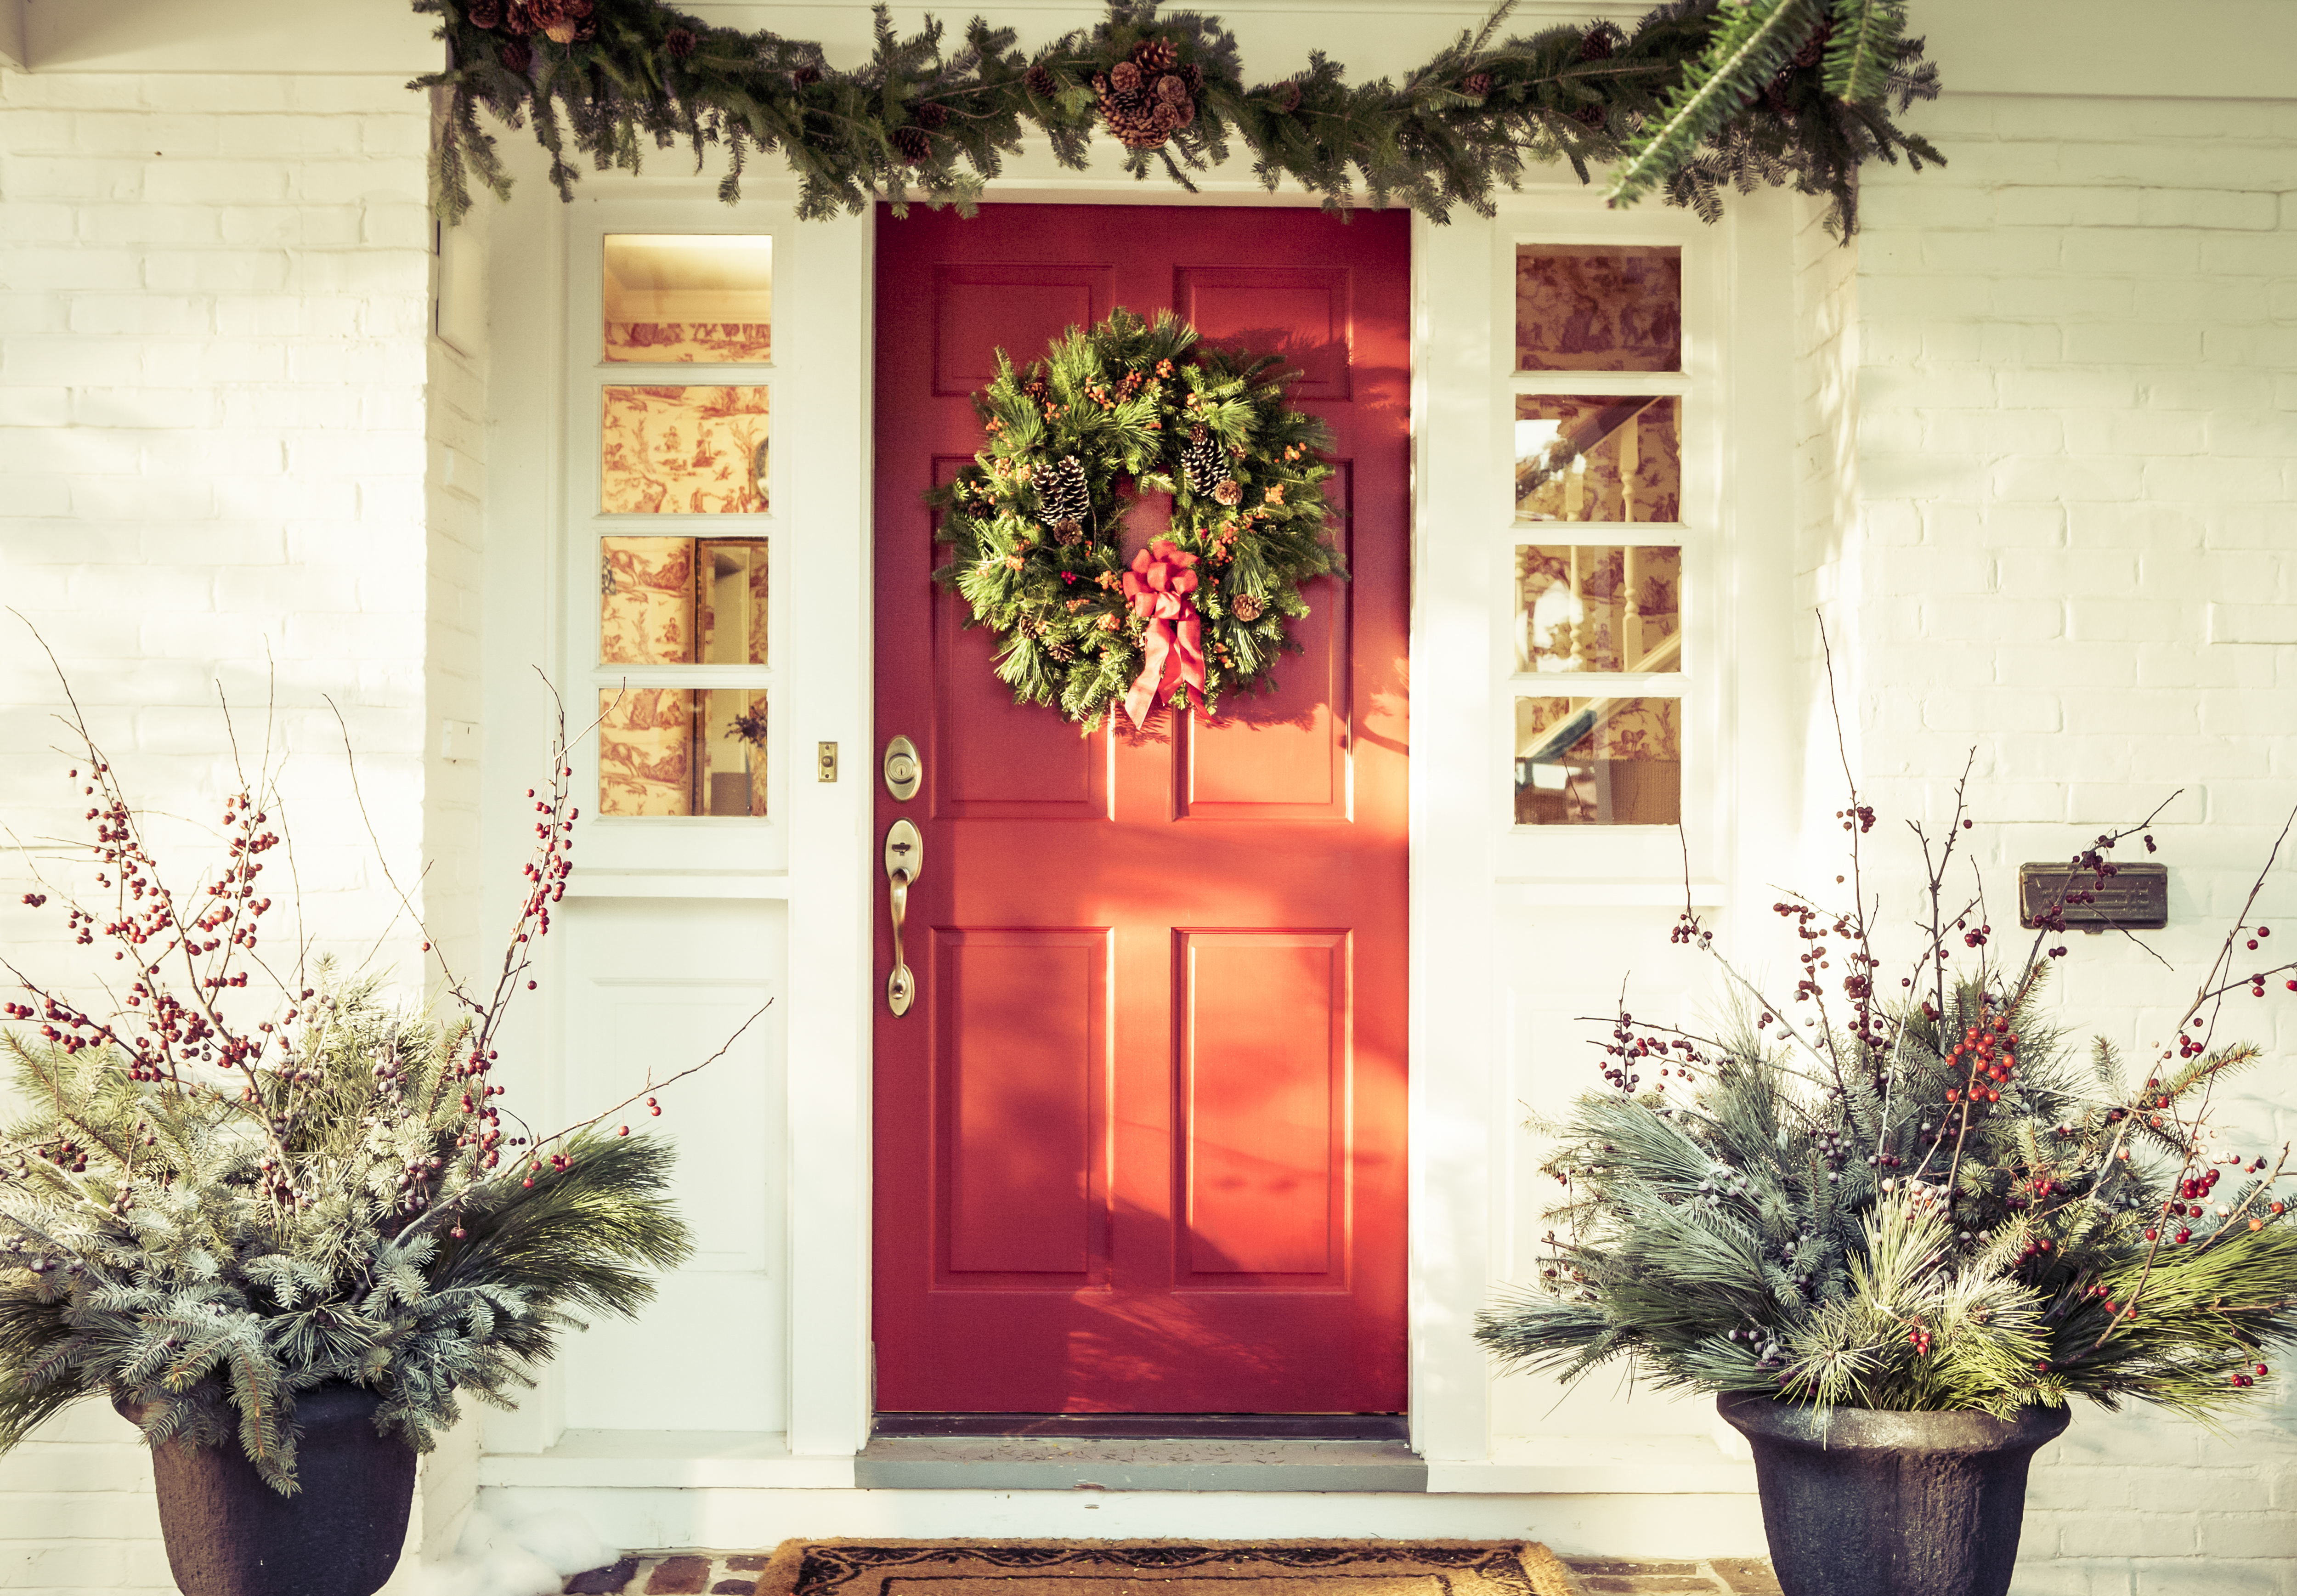 A red door decorated for Christmas. | Source: Getty Images